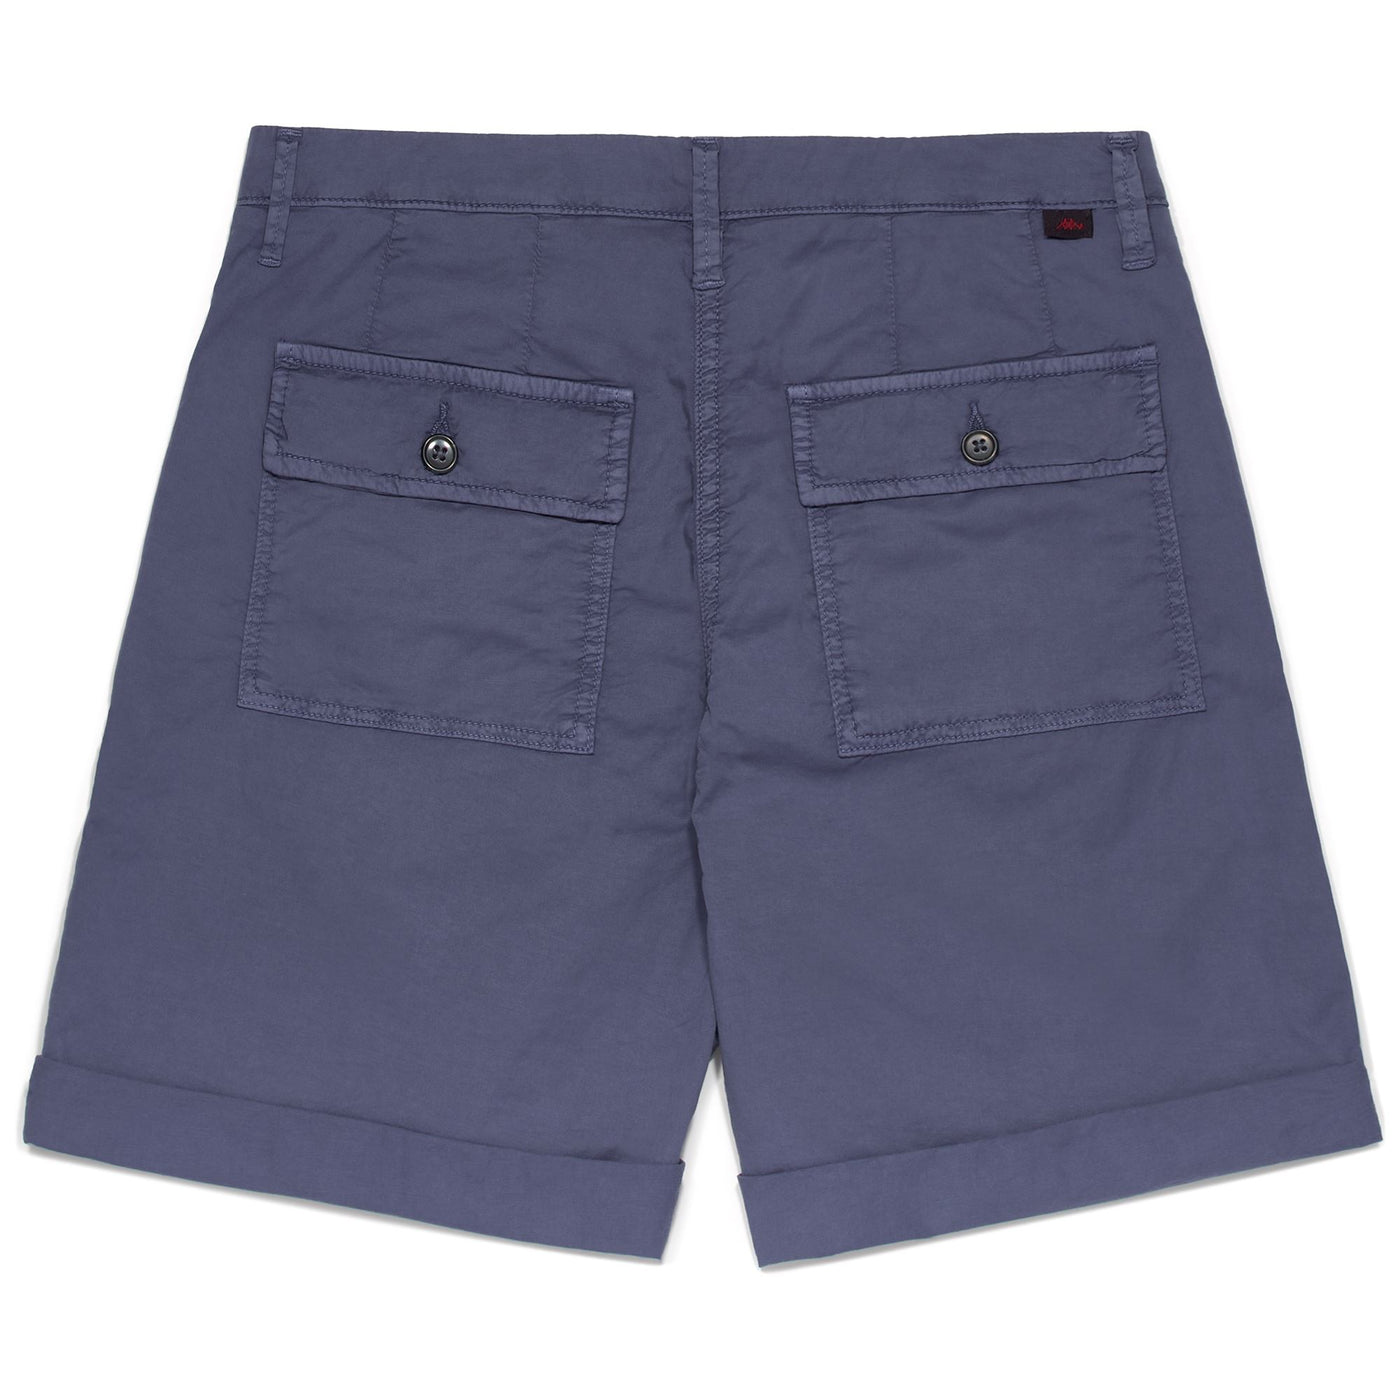 Shorts Woman NEW NUI Fatigue BLUE FIORD Dressed Front (jpg Rgb)	